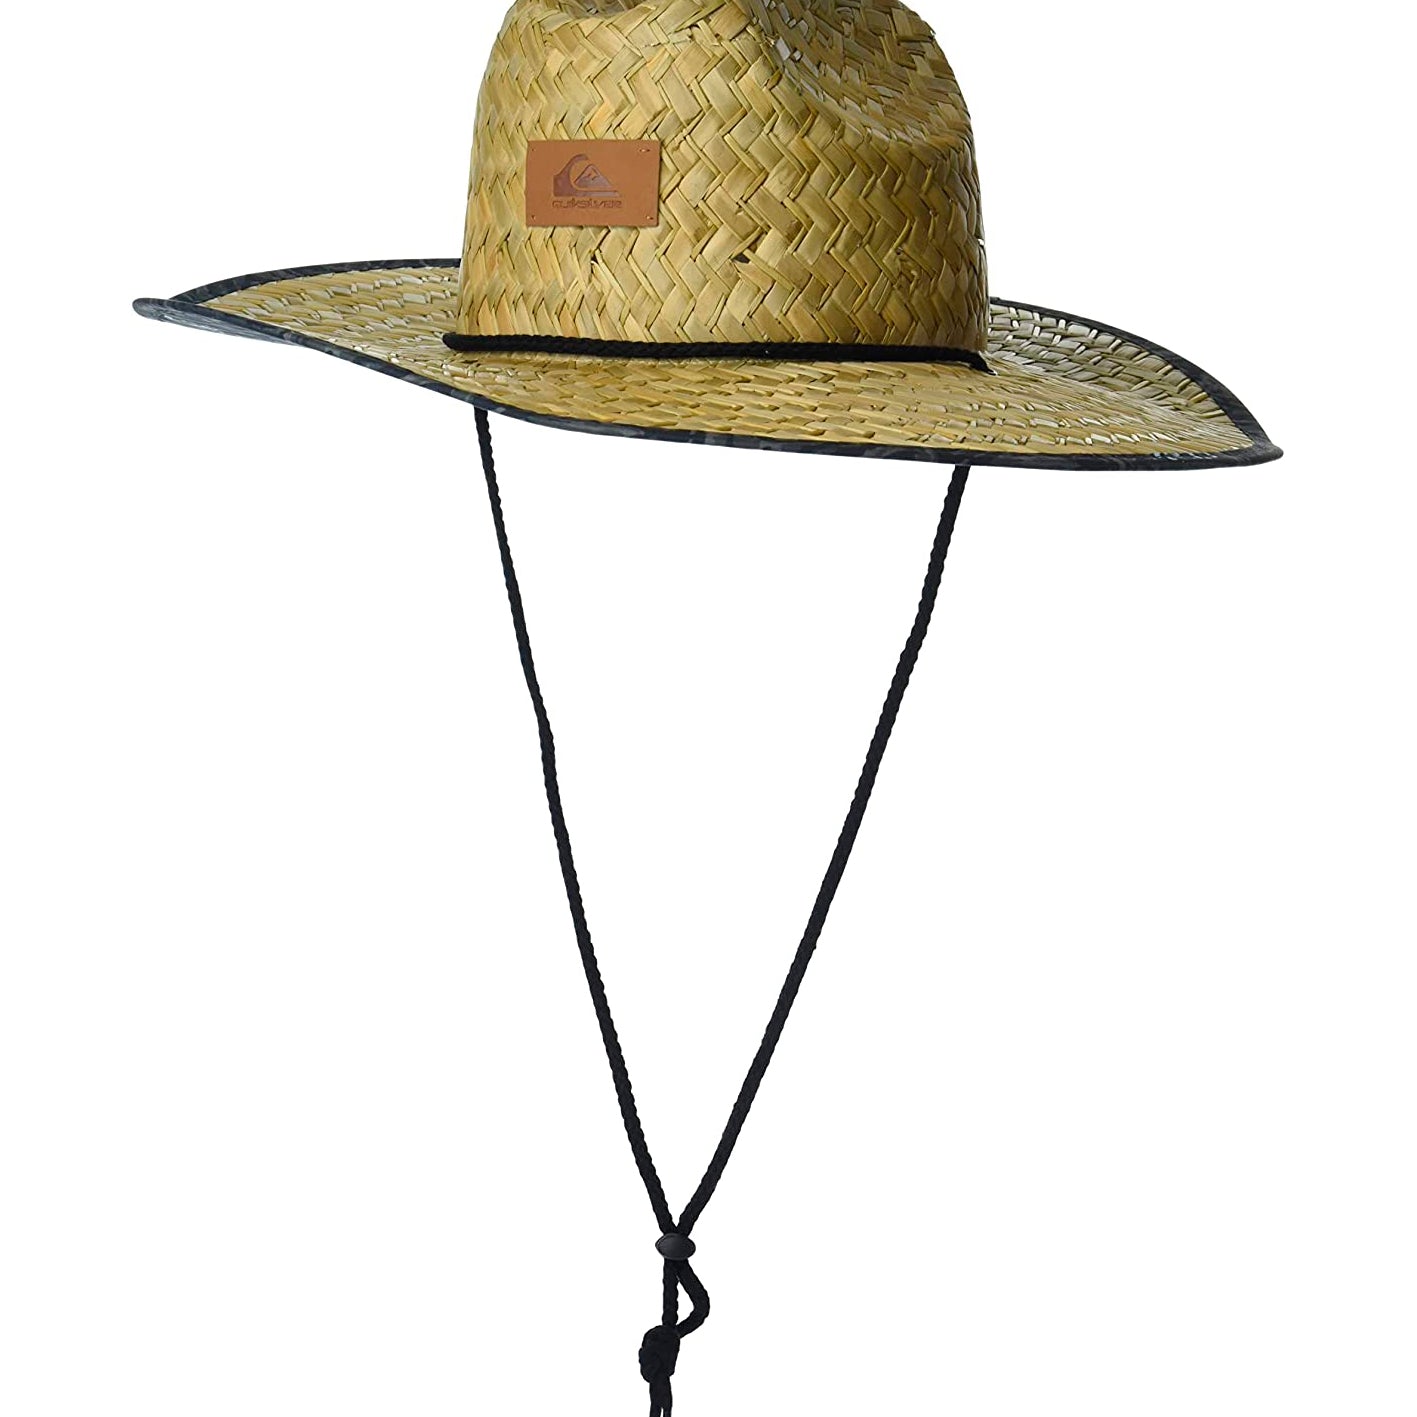 Quiksilver Outsider Straw Lifeguard Hat KZM0 L/XL